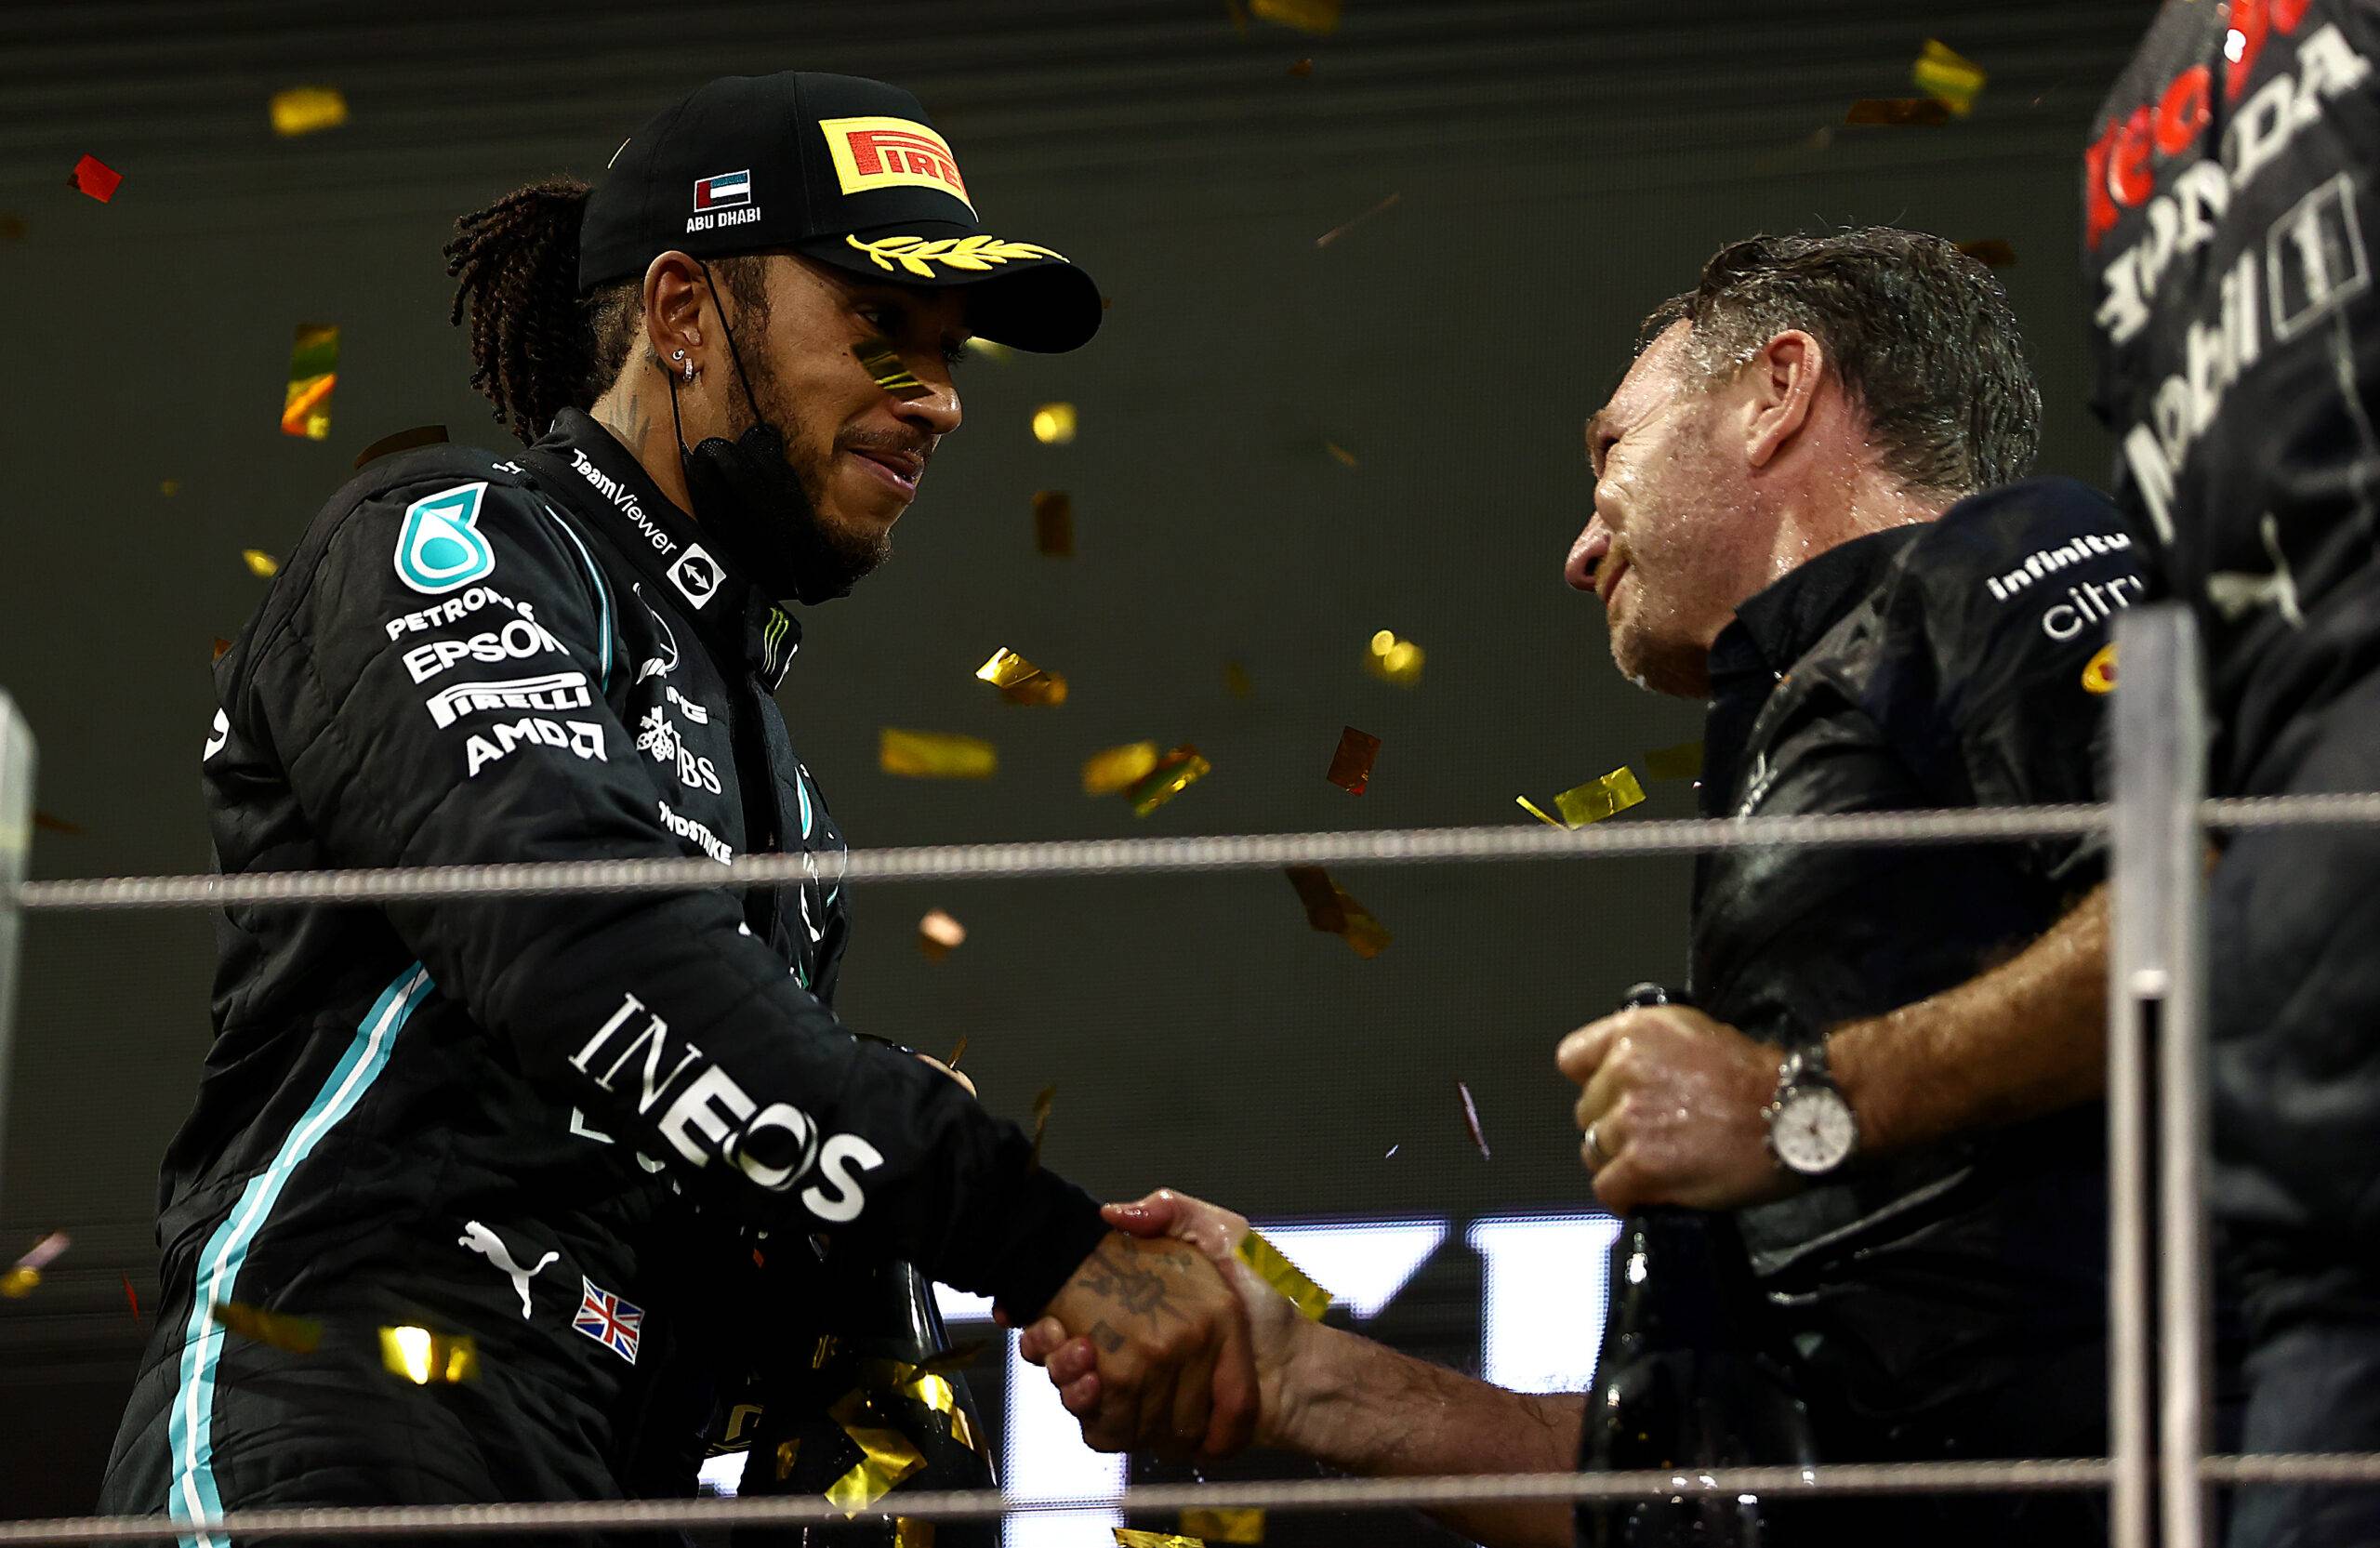 Lewis Hamilton shakes hands with Christian Horner